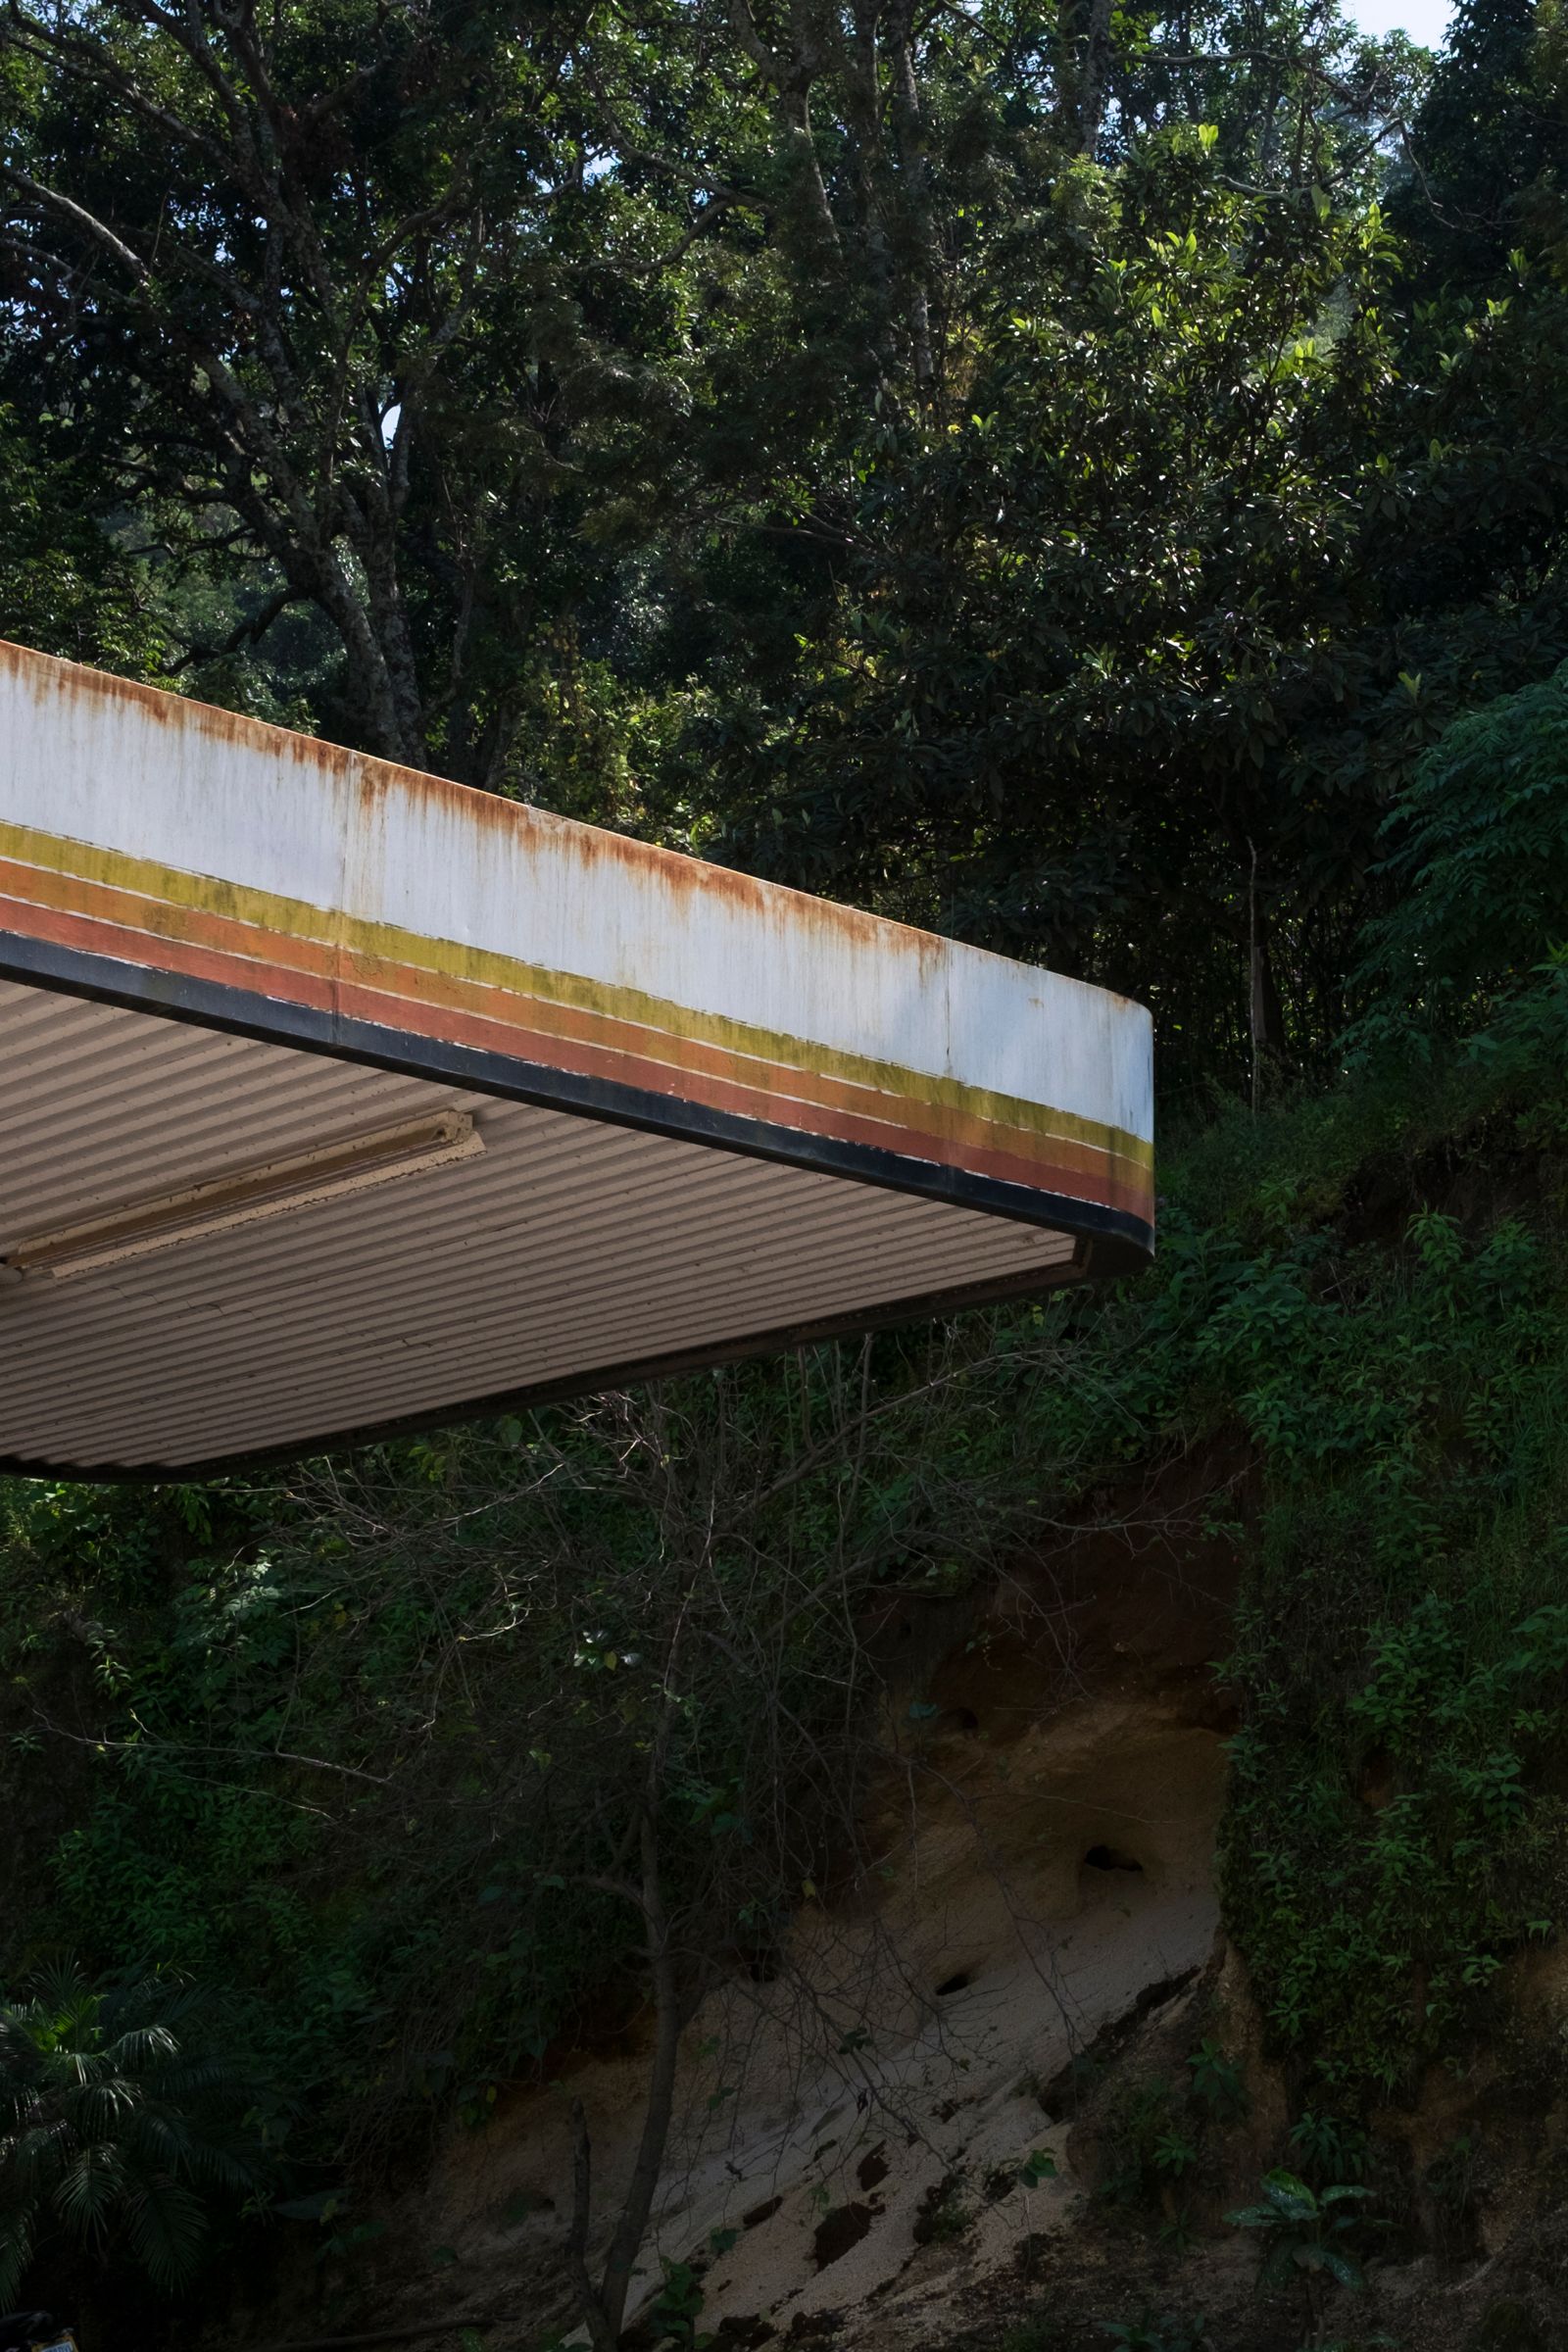 © Cris Veit - A gas station on the road to San Juan la Laguna reminds us of the impact of oil exploration as a form of colonization